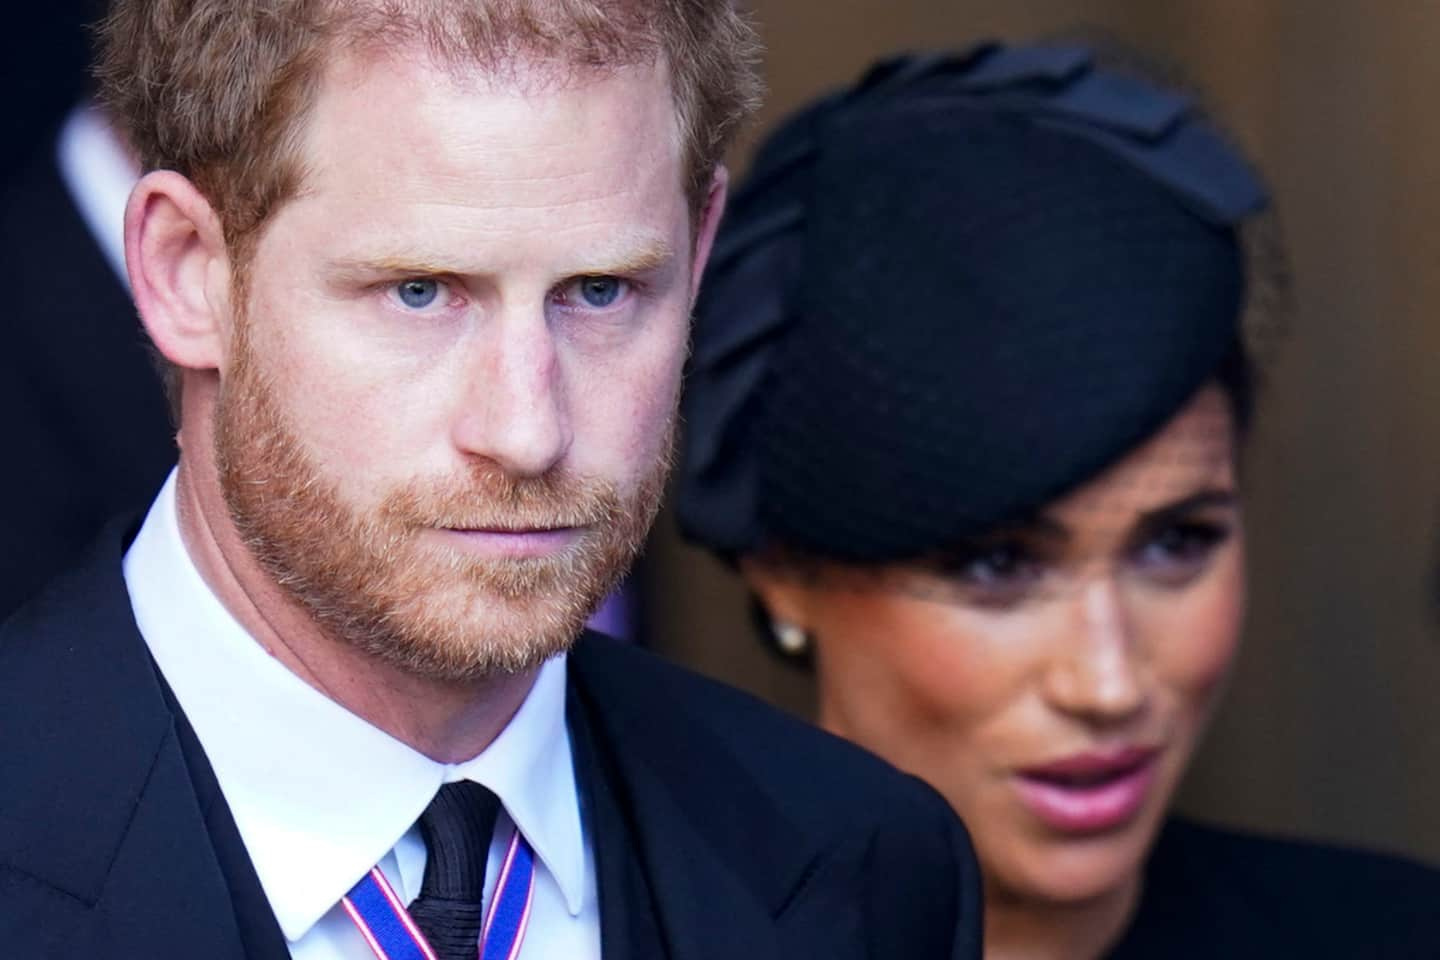 Prince Harry defends his “necessary” memoir on television